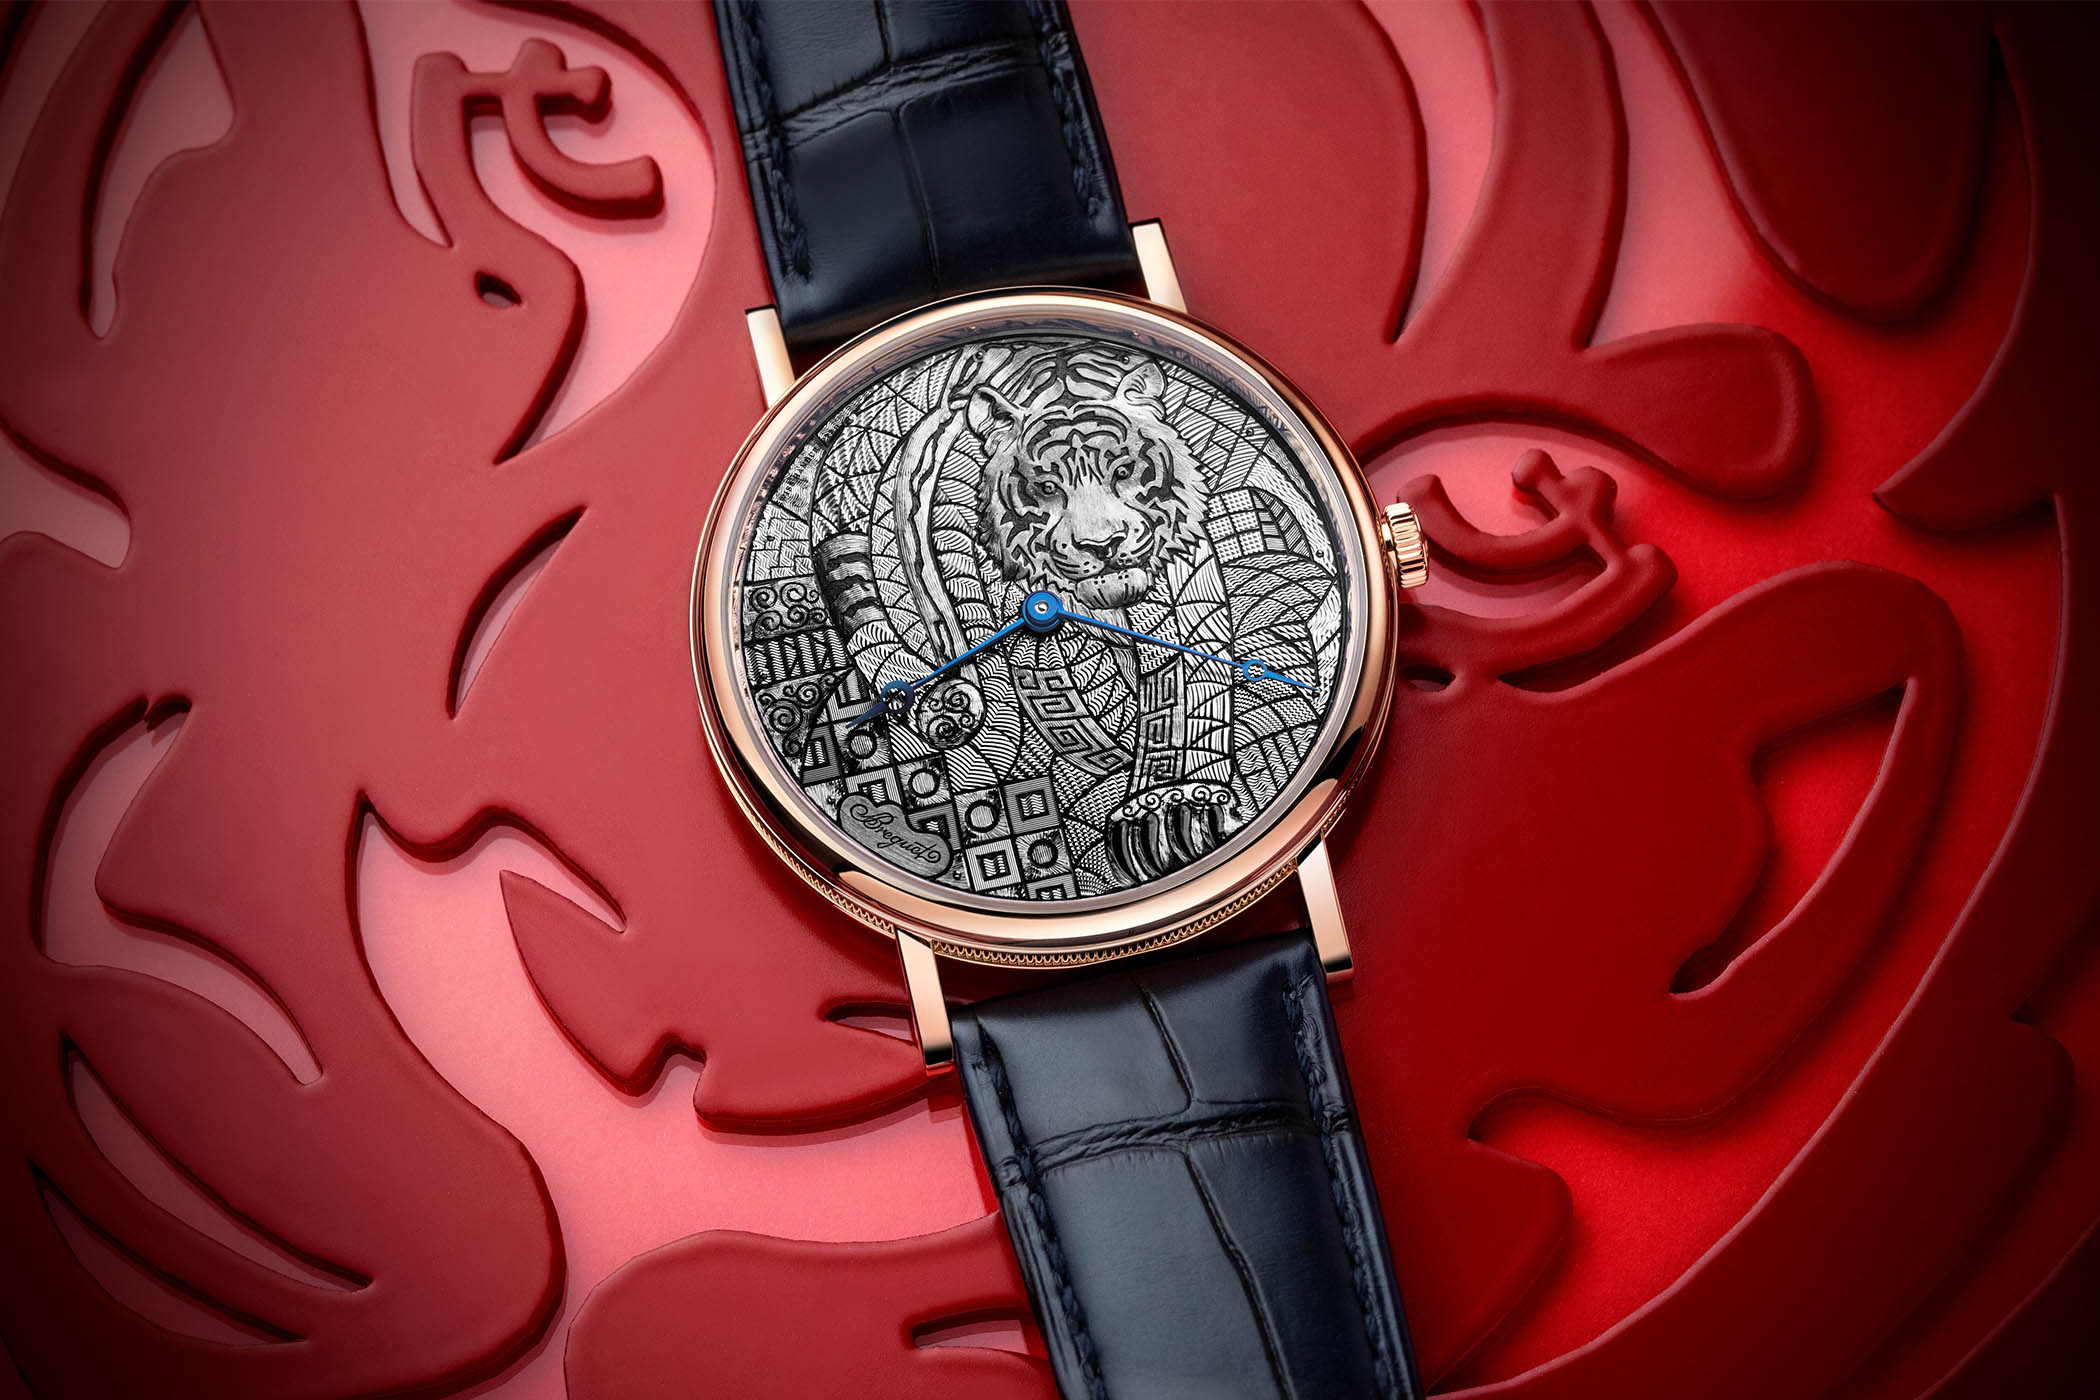 Breguet 7145 Classique Year of the Tiger